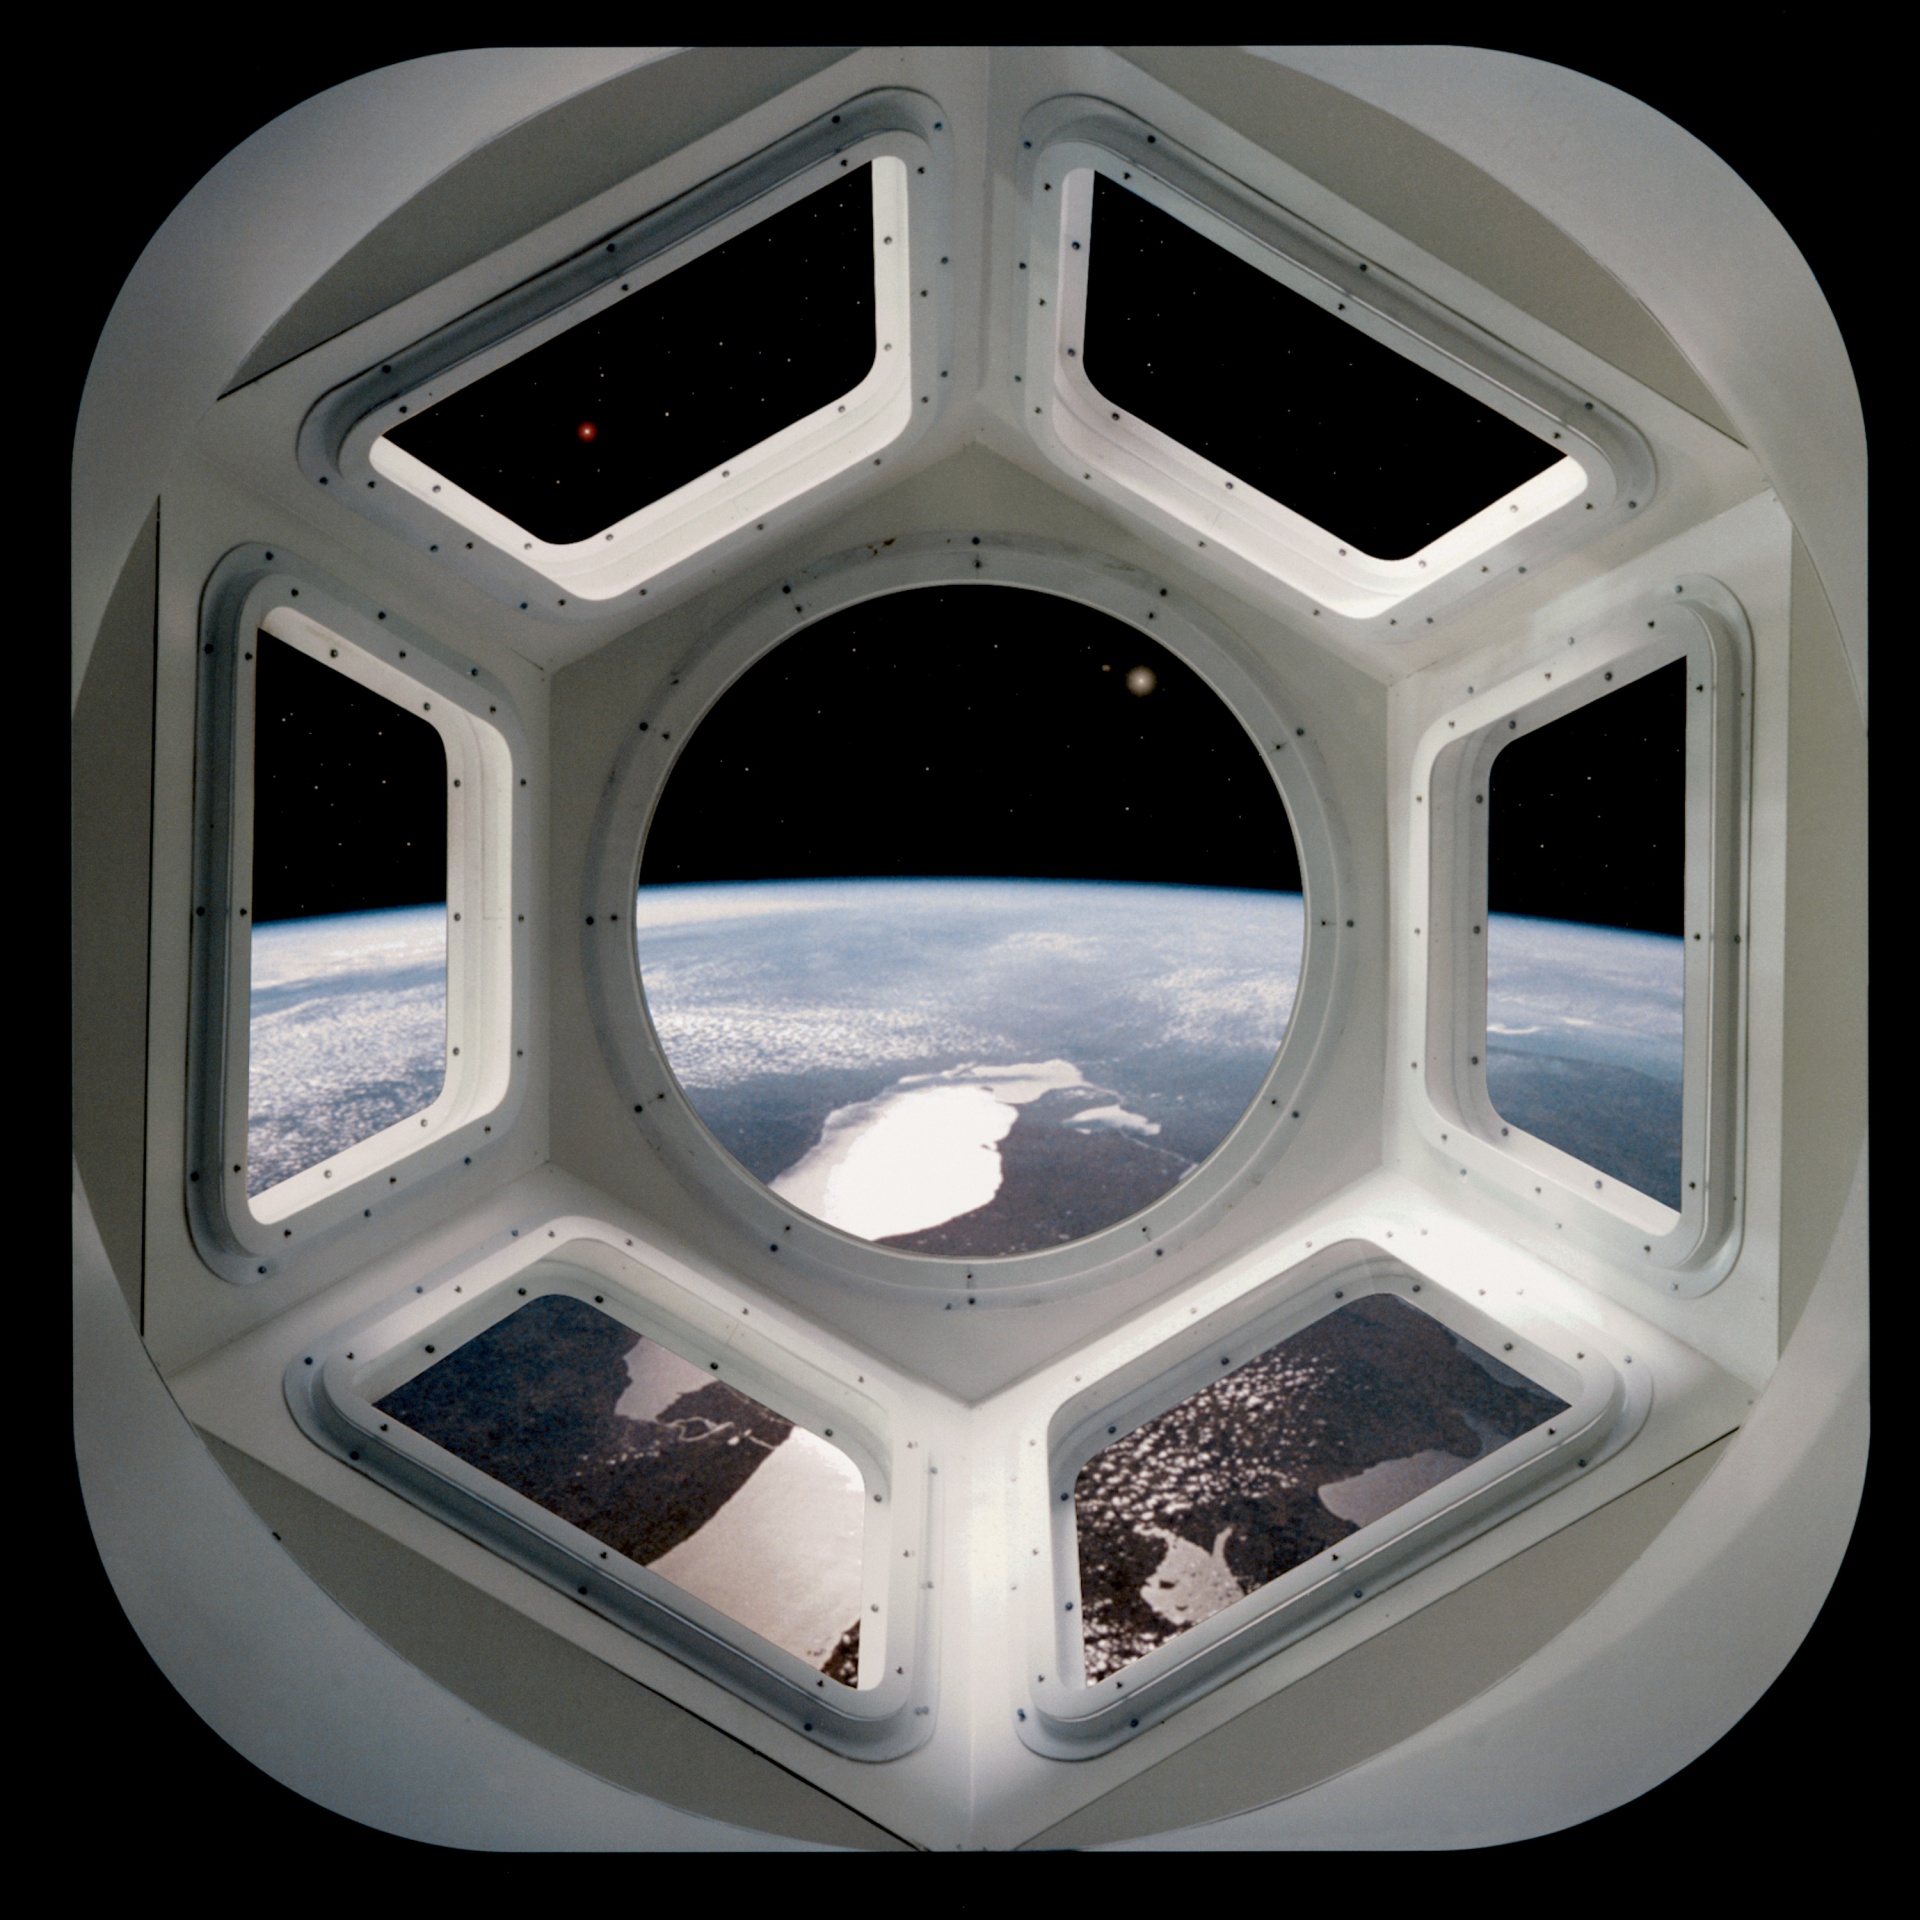 Space Station Cupola